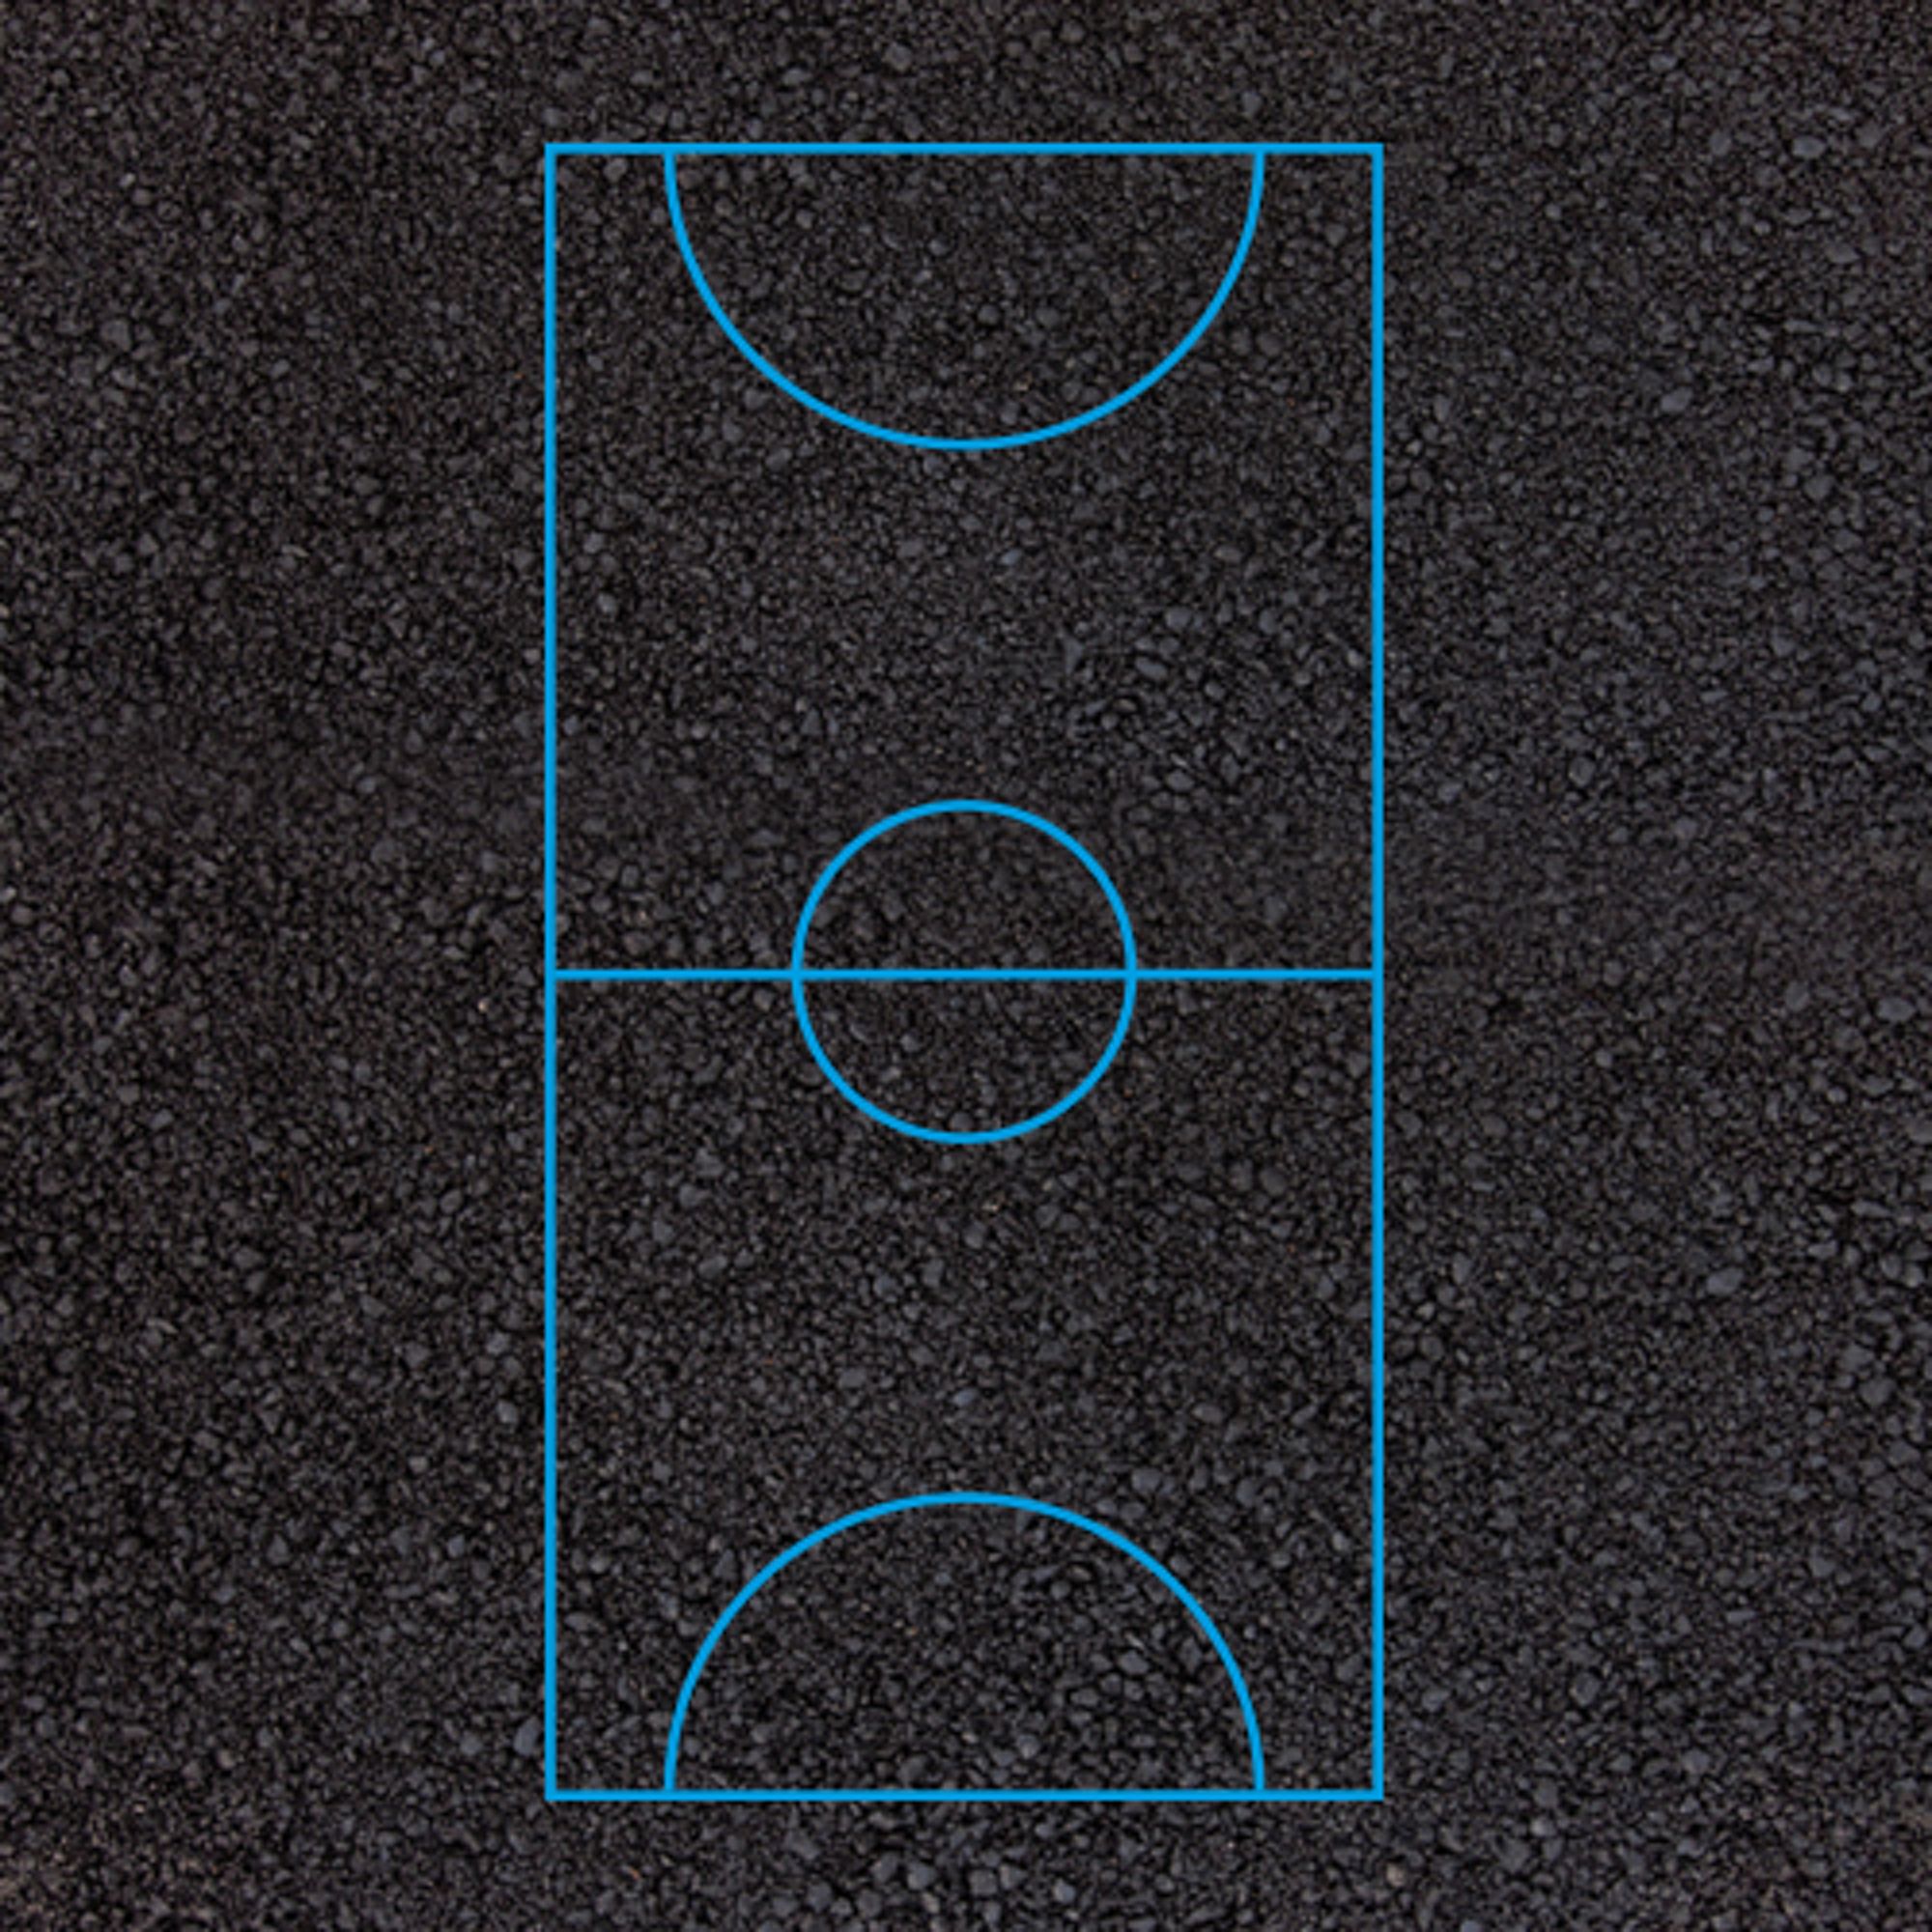 5 A Side Court White Markings